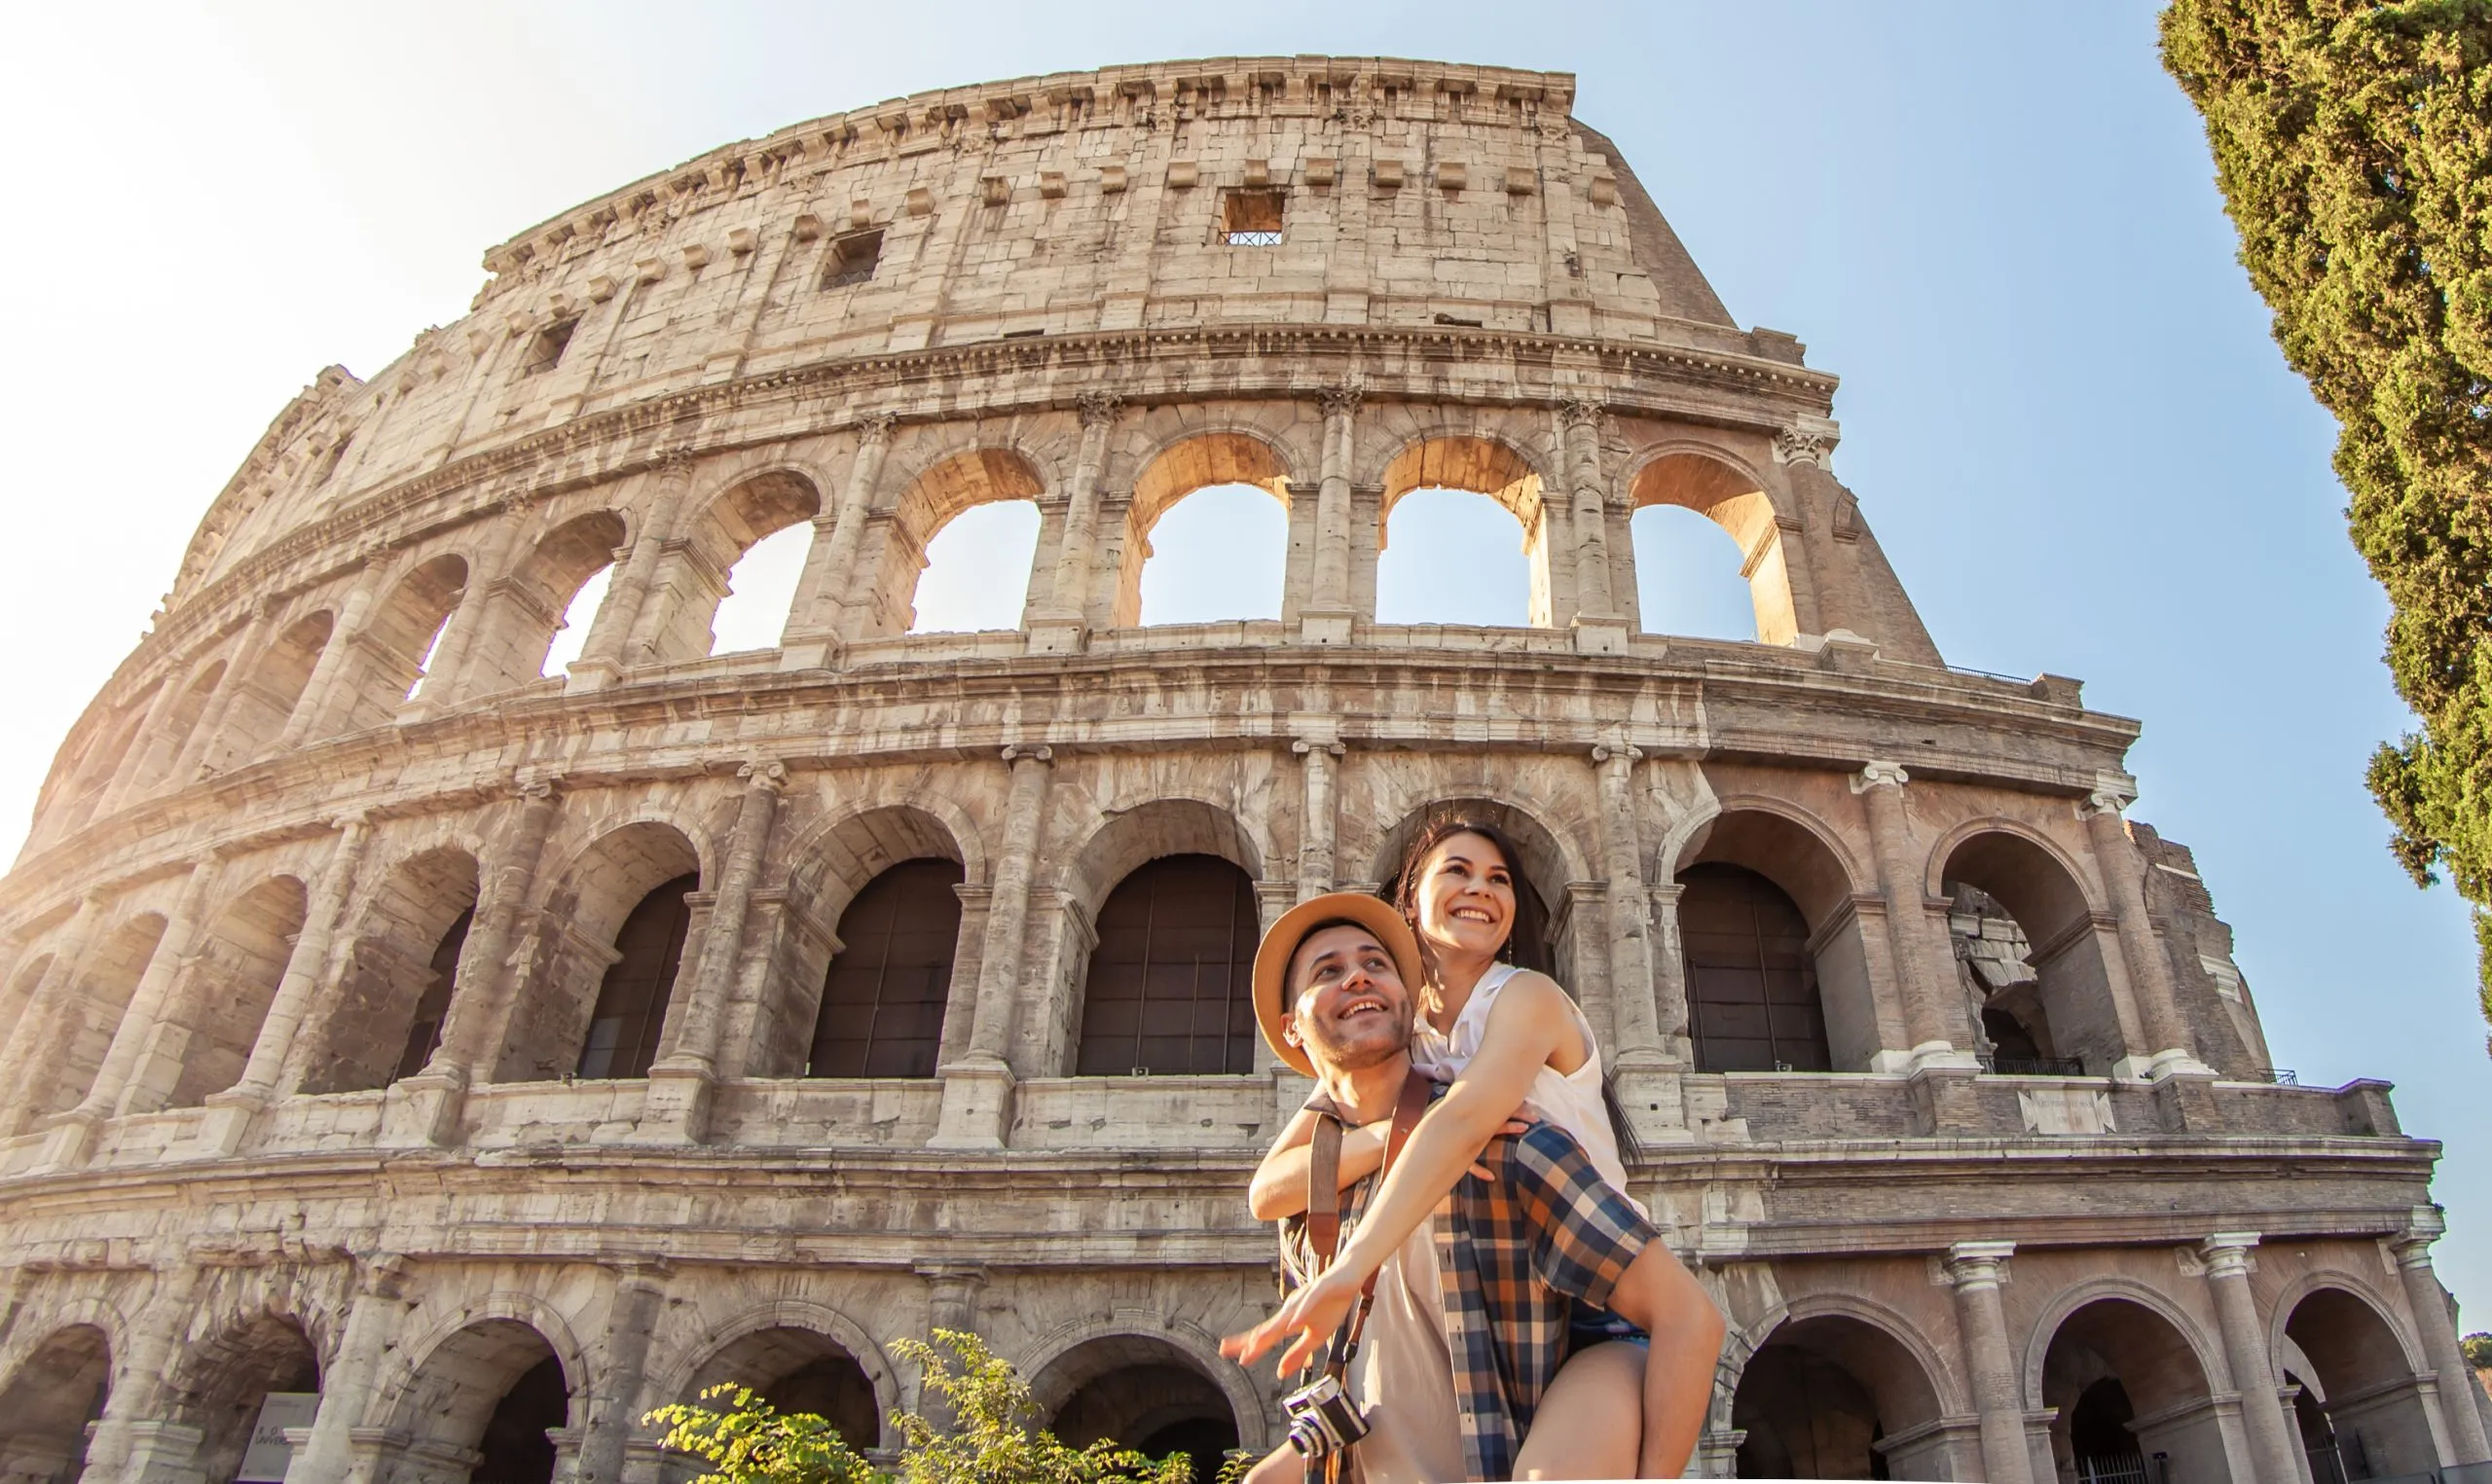 Young happy couple having fun at Colosseum, Rome. Piggyback posing for pictures.